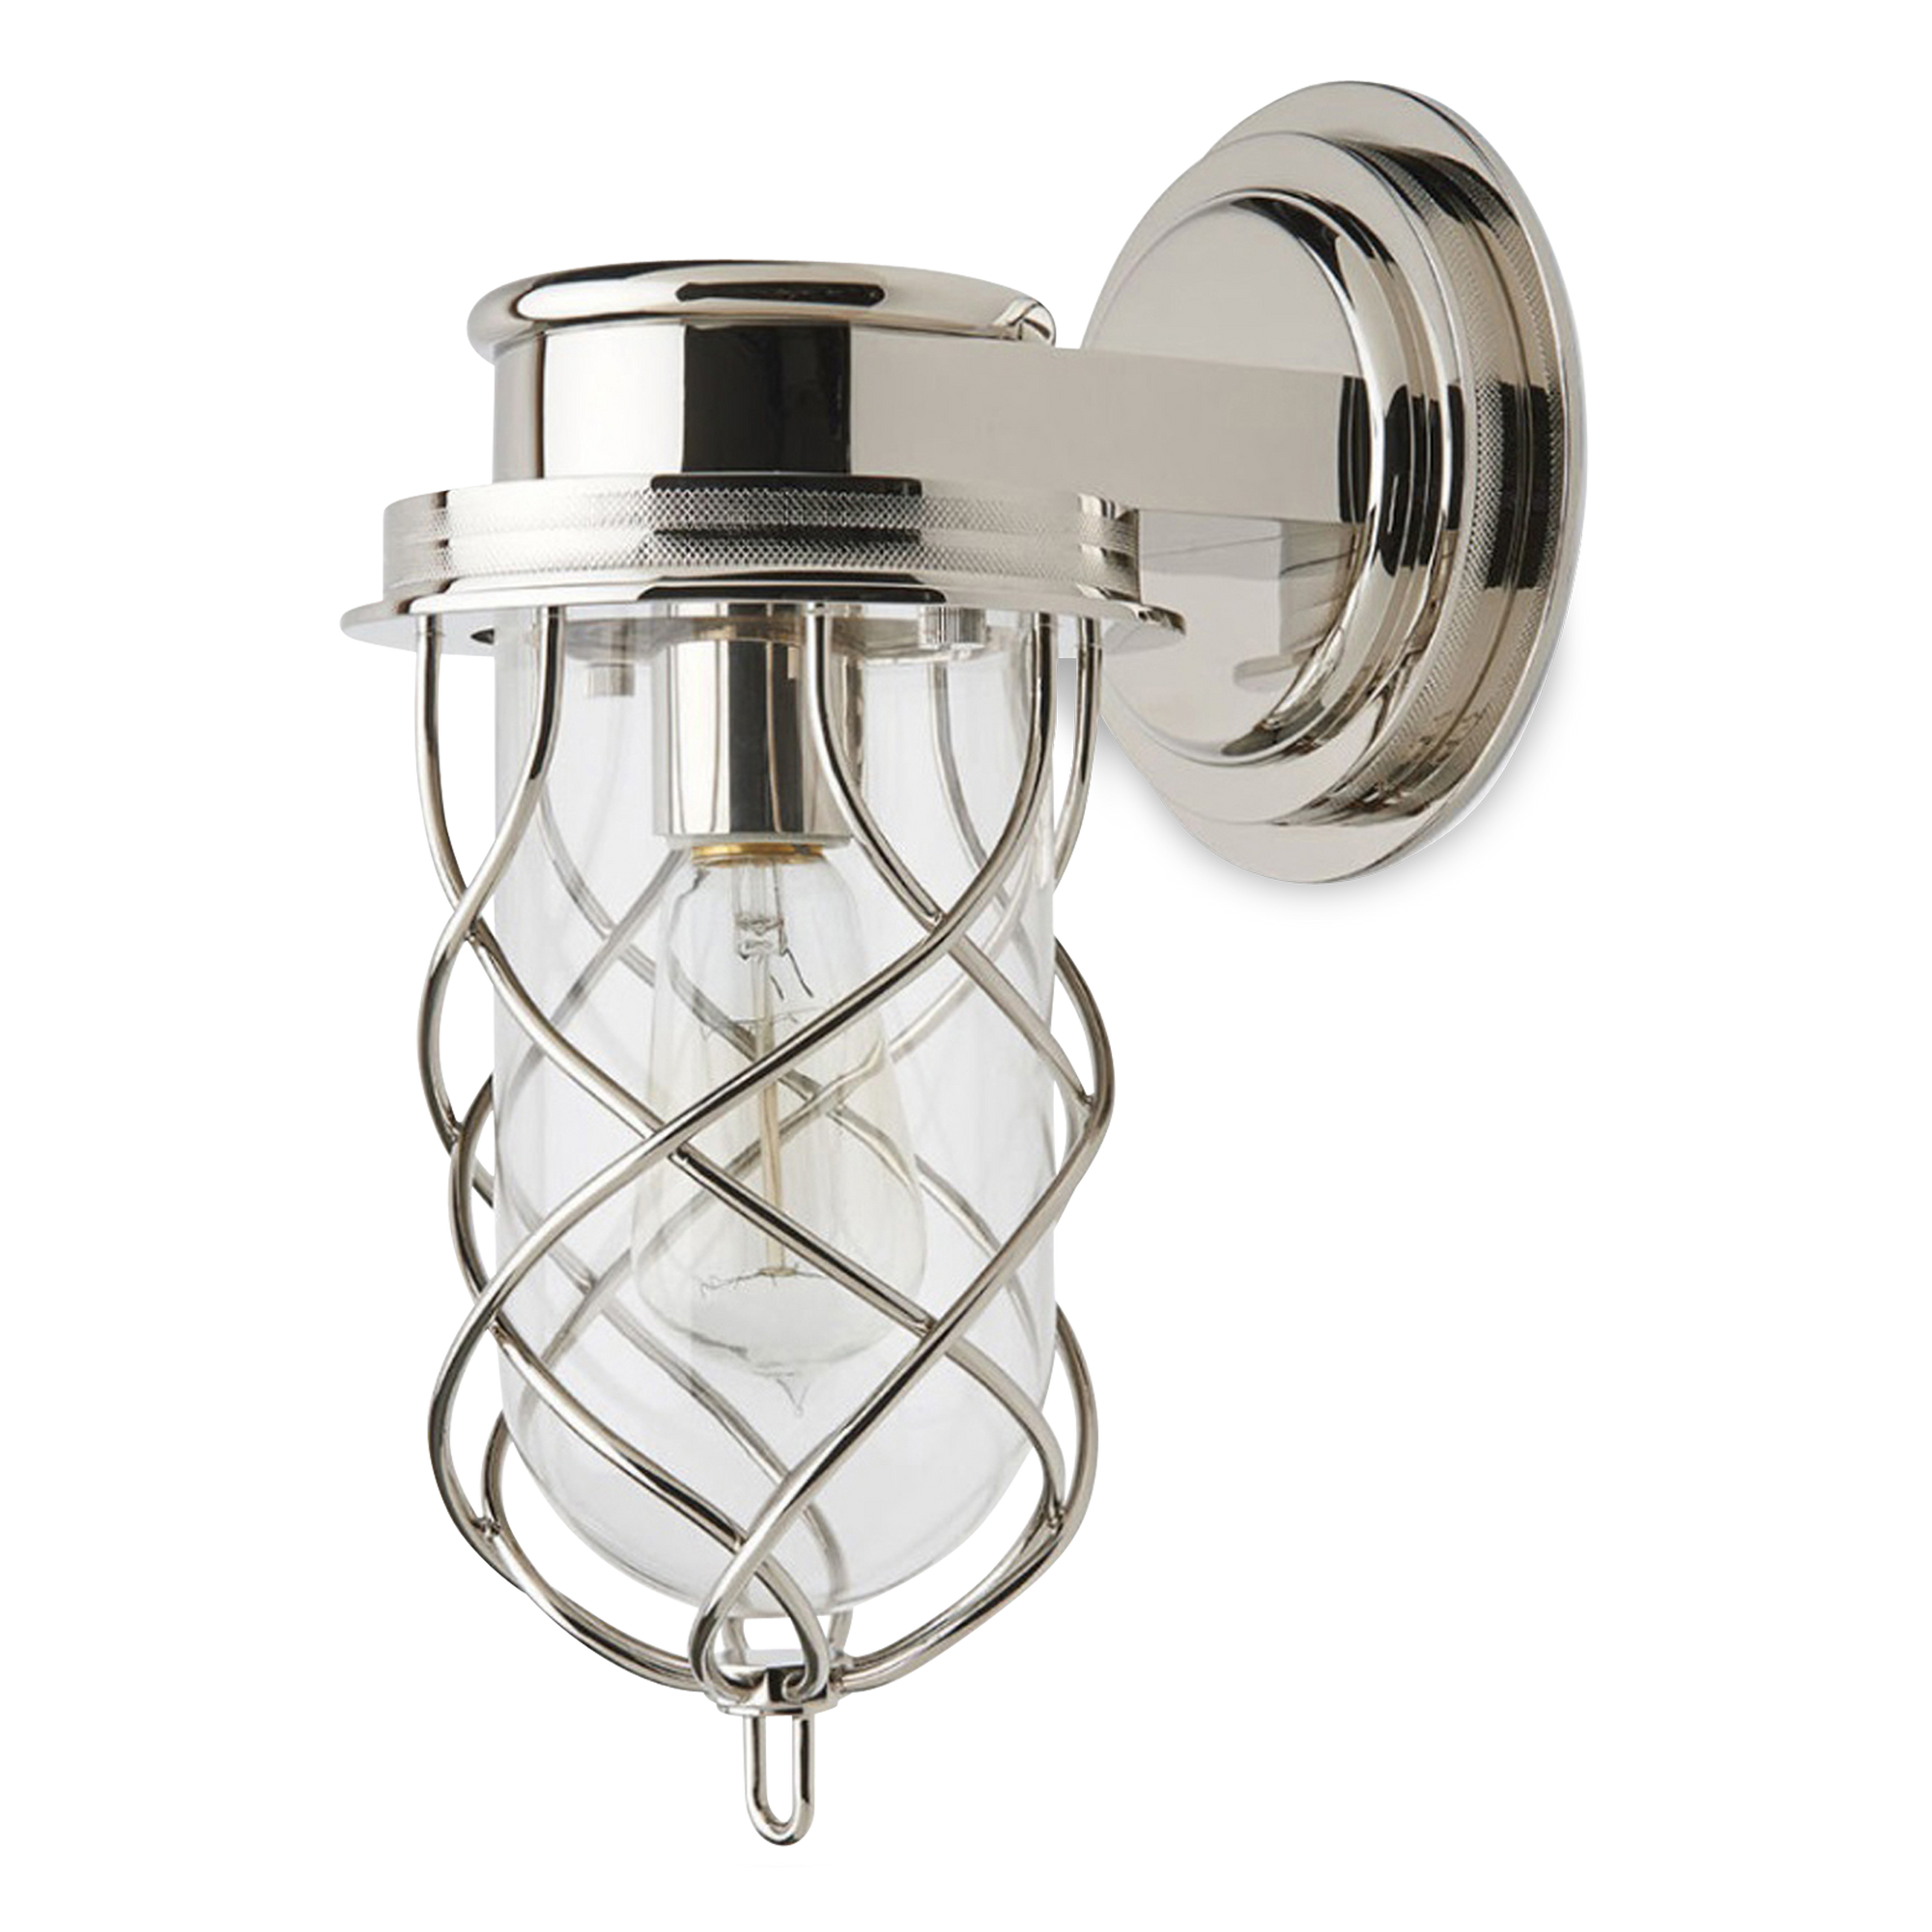 Sturdy, rugged and yet refined, the Compass sconce features a clear glass bell shade enclosed in a woven brass cage that is held by knurled rings.